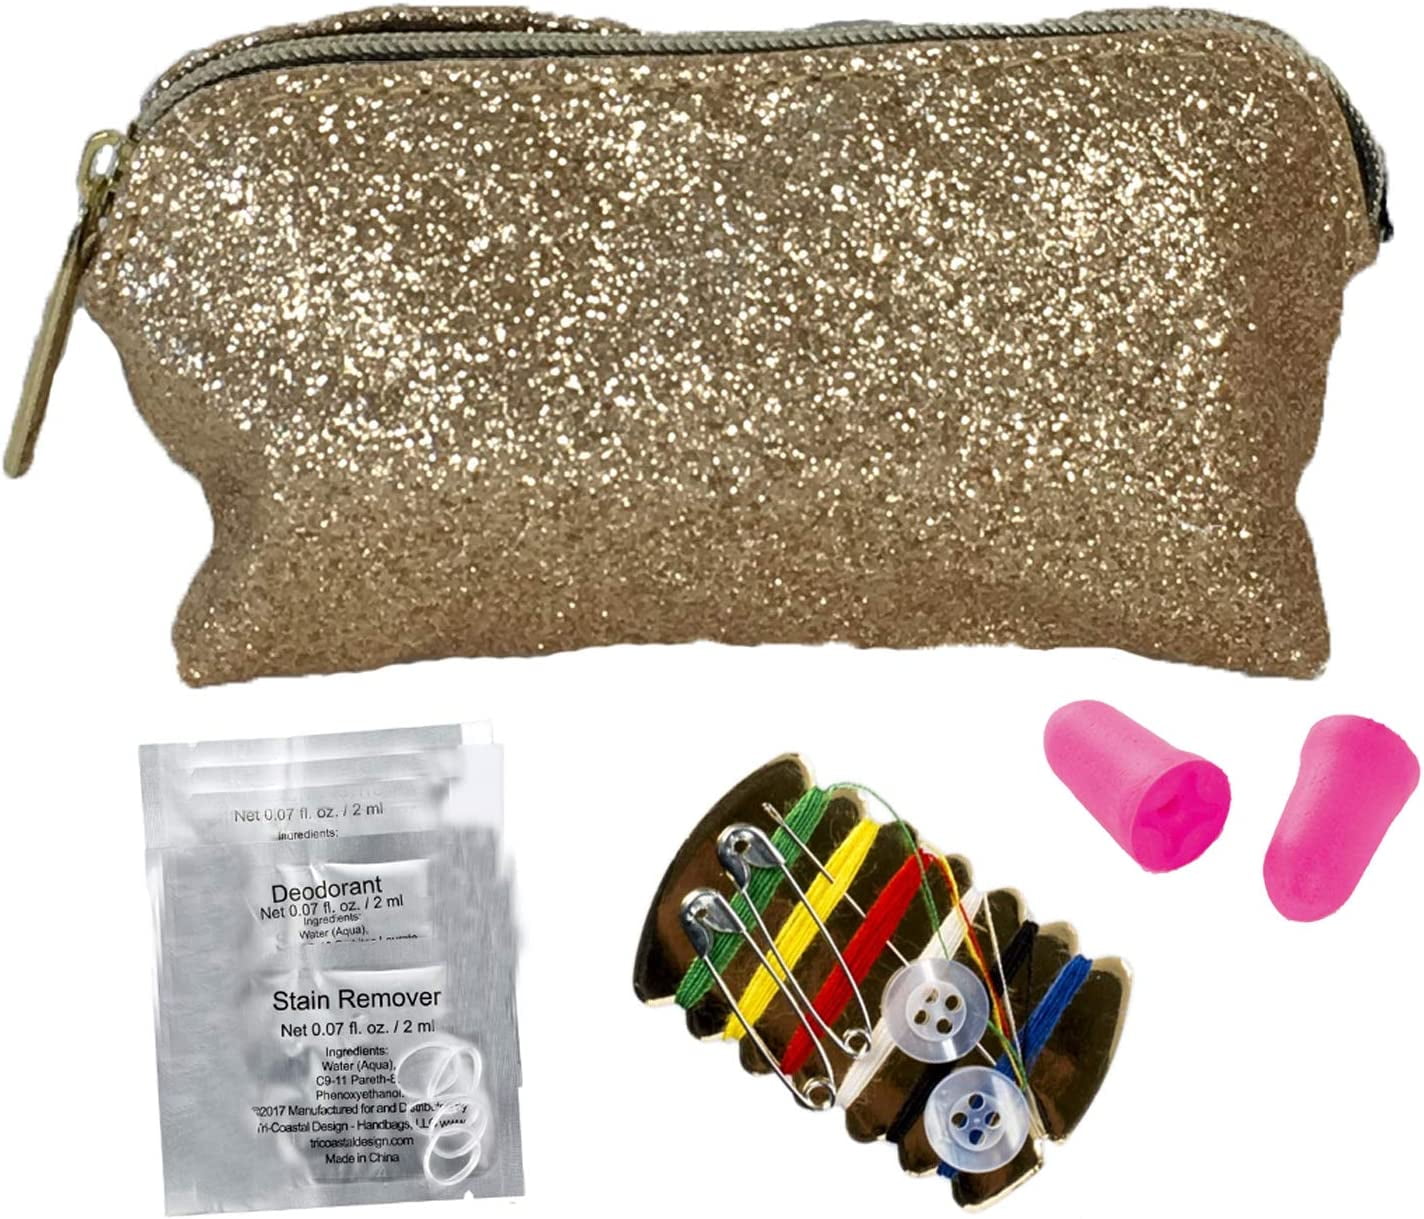 23 Piece Travel Emergency Kit in Gold Sparkle Mixit Cosmetic Zippered Bag  for sale online